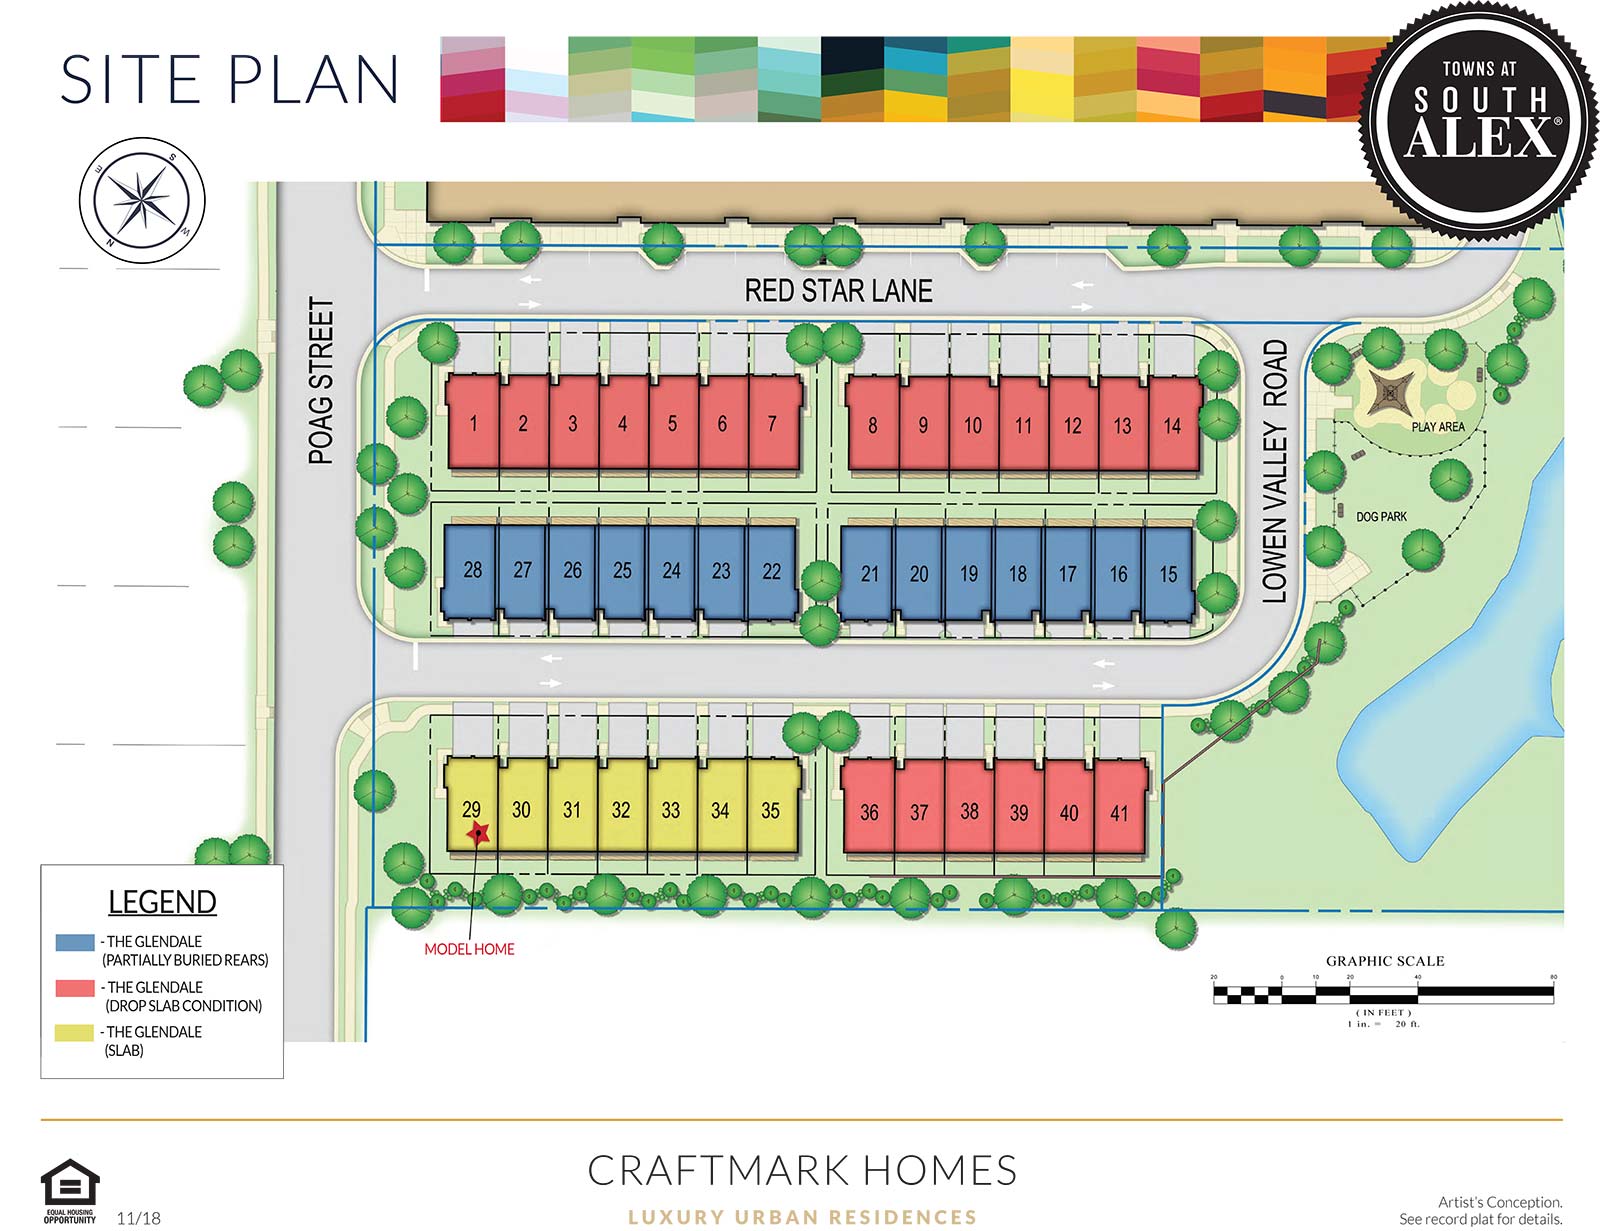 Towns at South Alex Site Plan, 4-Level Townhomes in Alexandria VA, Craftmark Homes